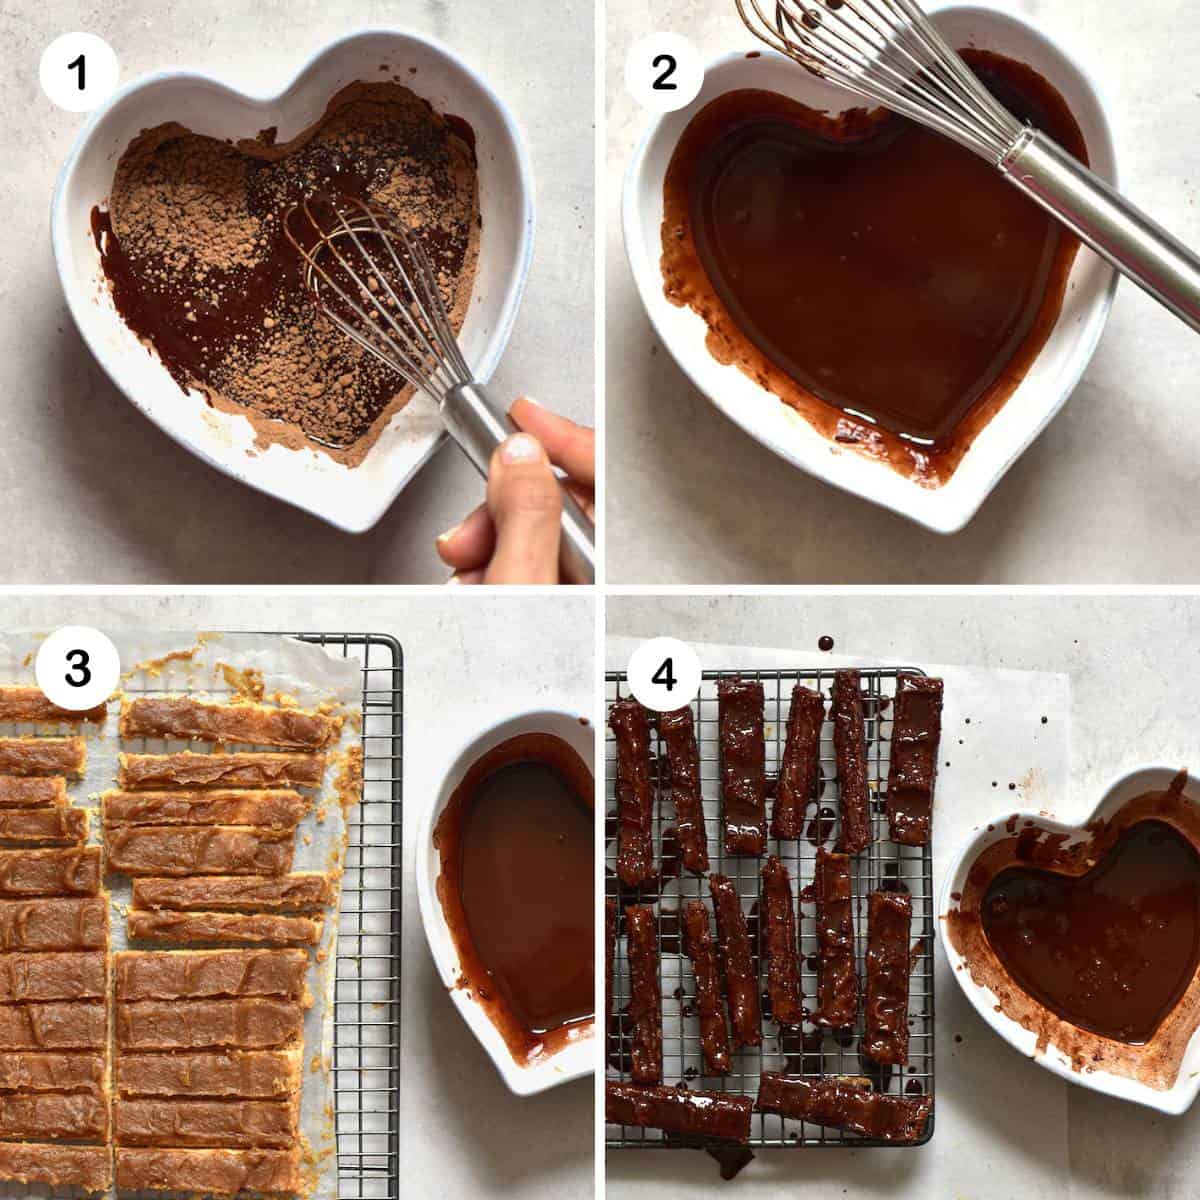 Steps for coating Twix bars with chocolate